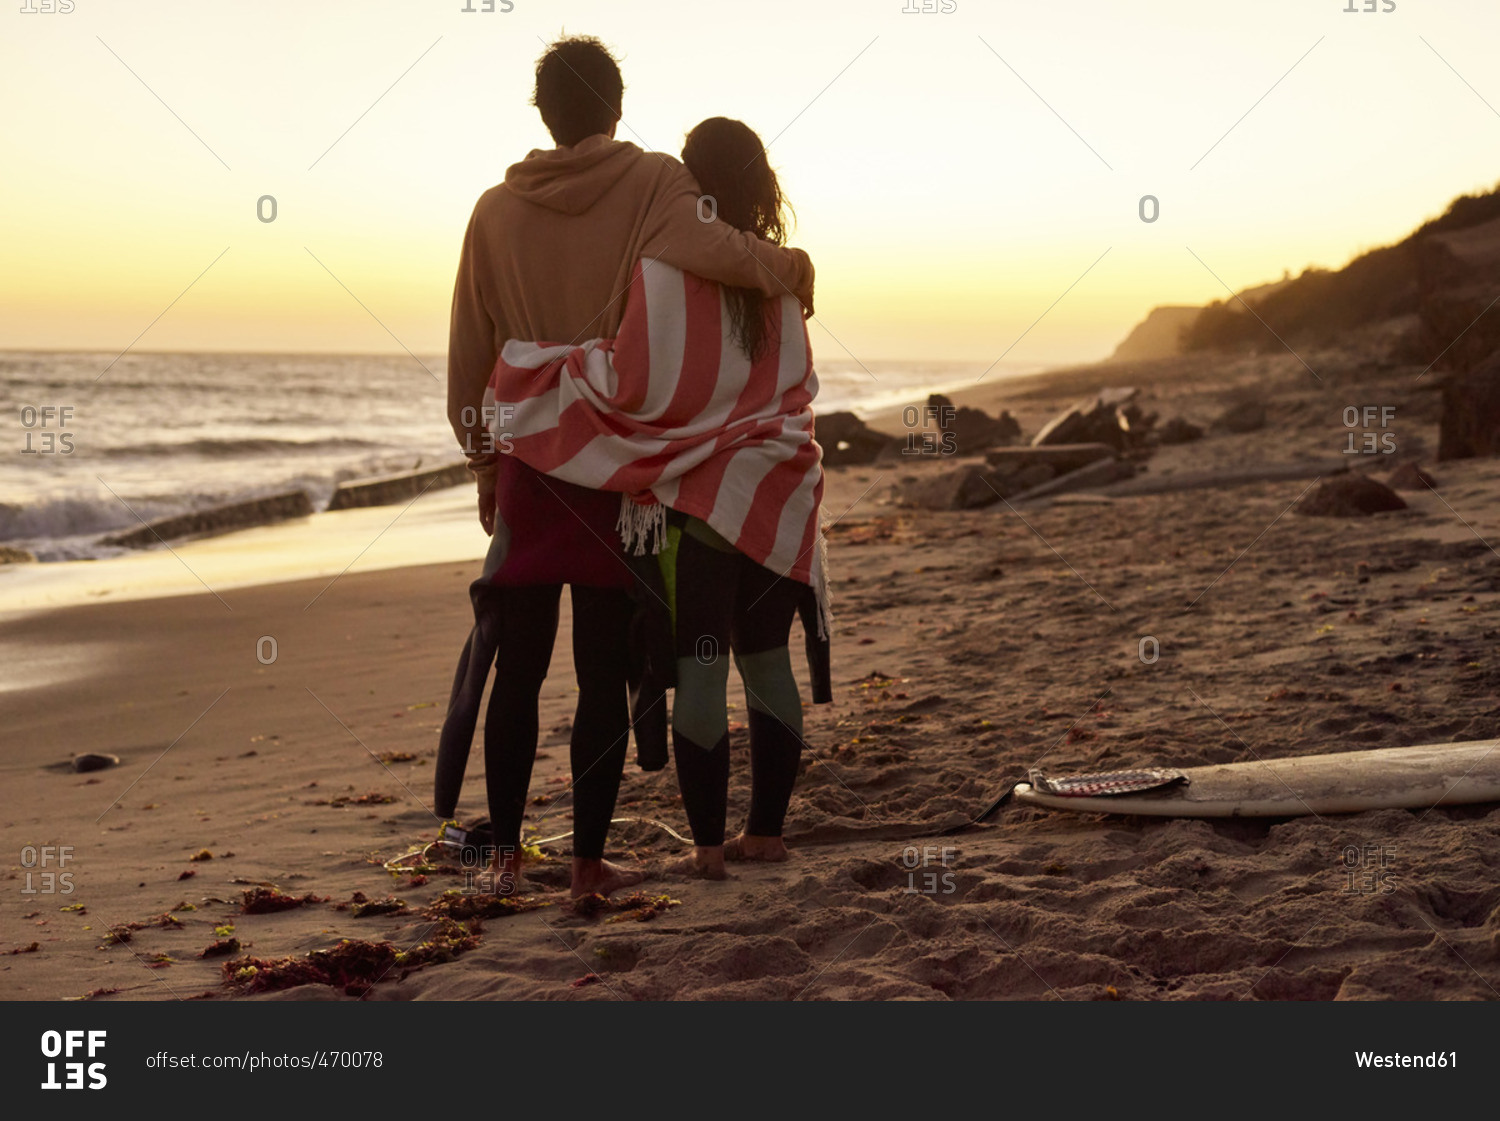 Couple embracing on the beach at sunset next to surfboard